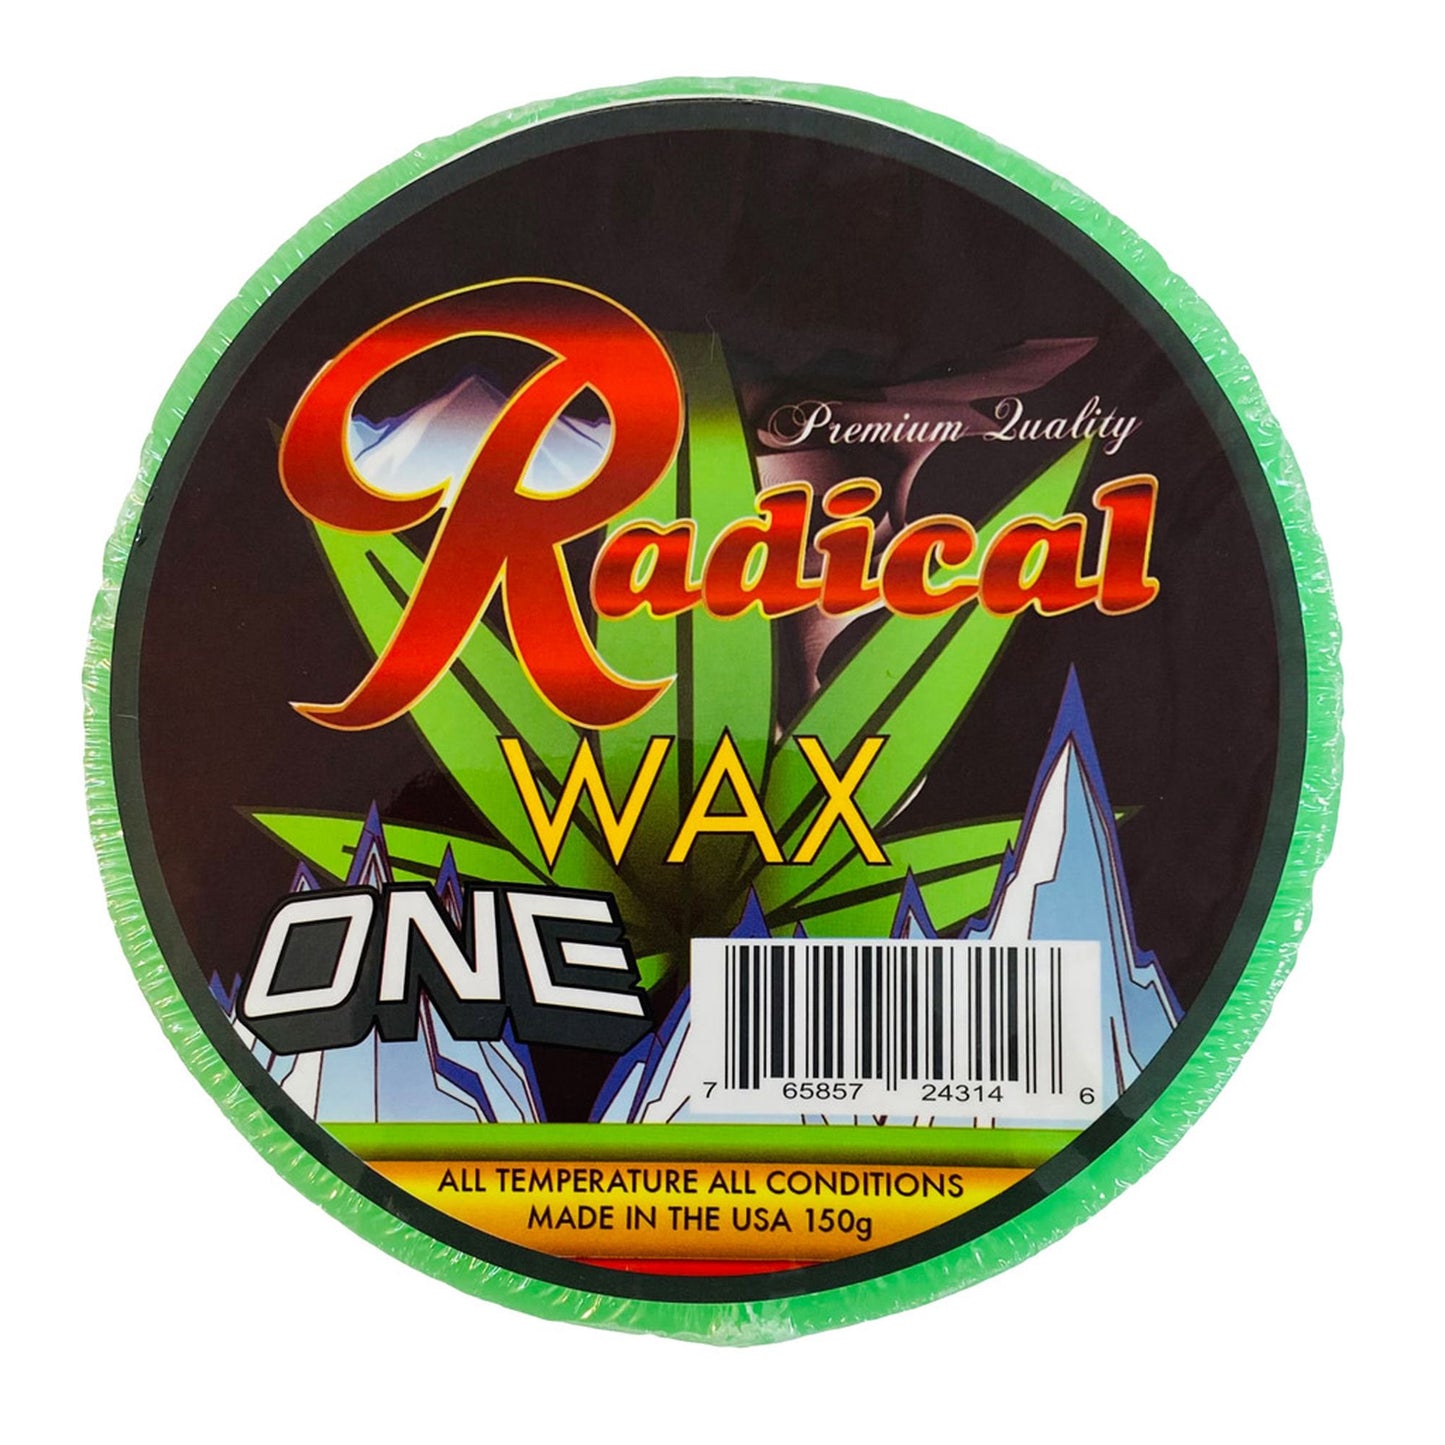 Oneball Radical Green Snow Wax One Color OS Wax